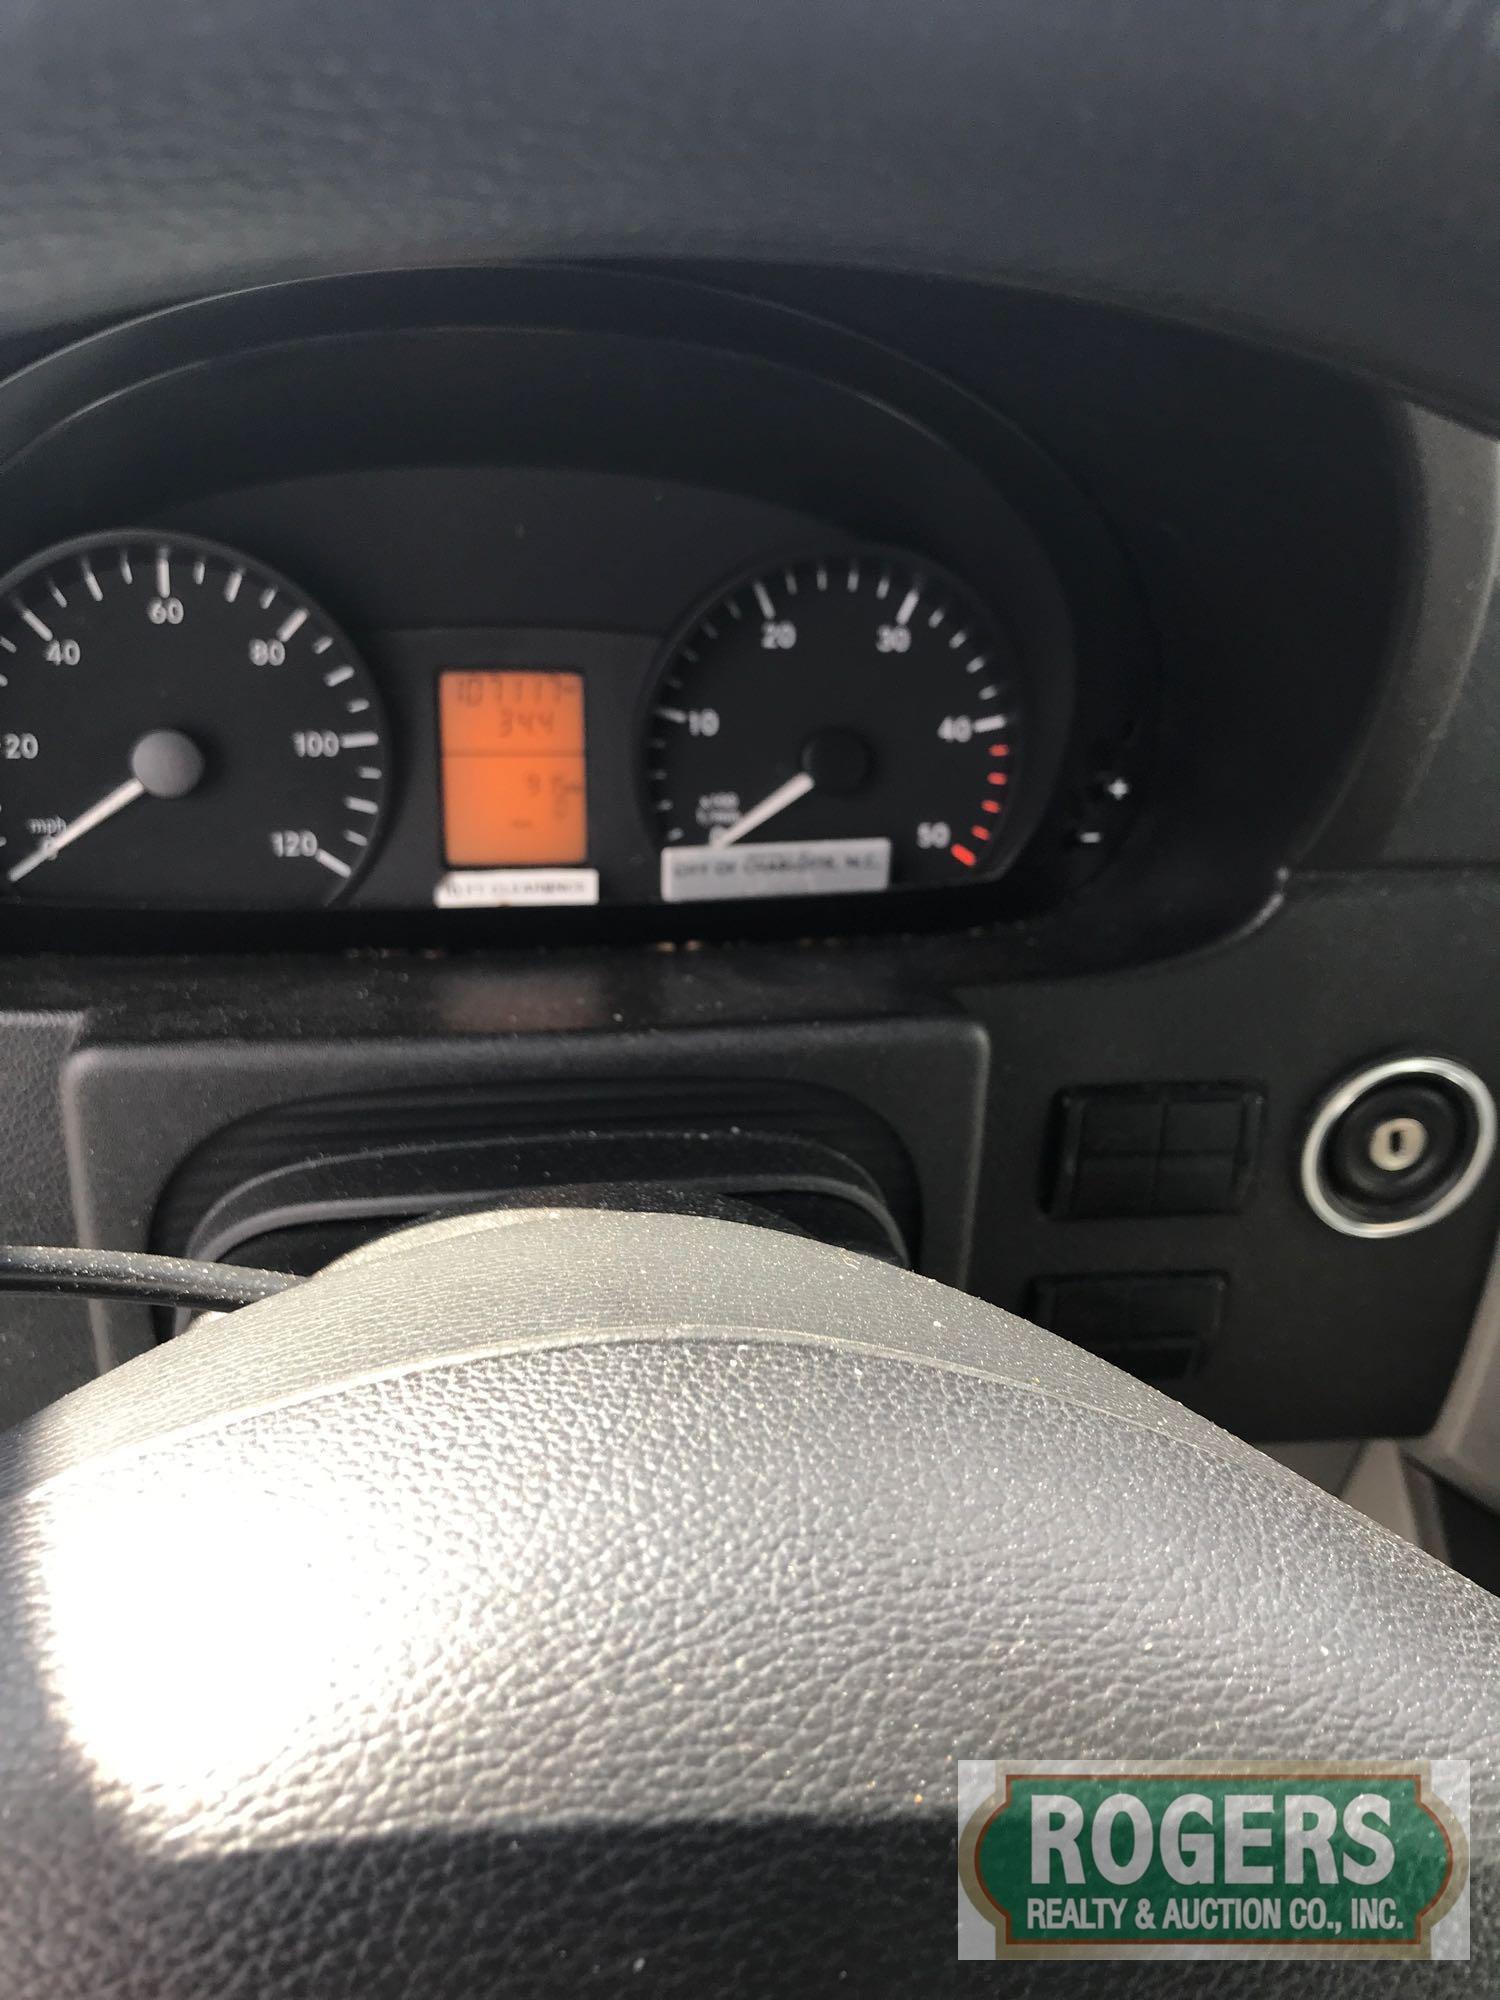 2014, Mercedes, Sprinter, BUS, WDAPF4CC6E5868107, 107117 miles, WILL NOT REV UP AFTER PUT IN DRIVE,